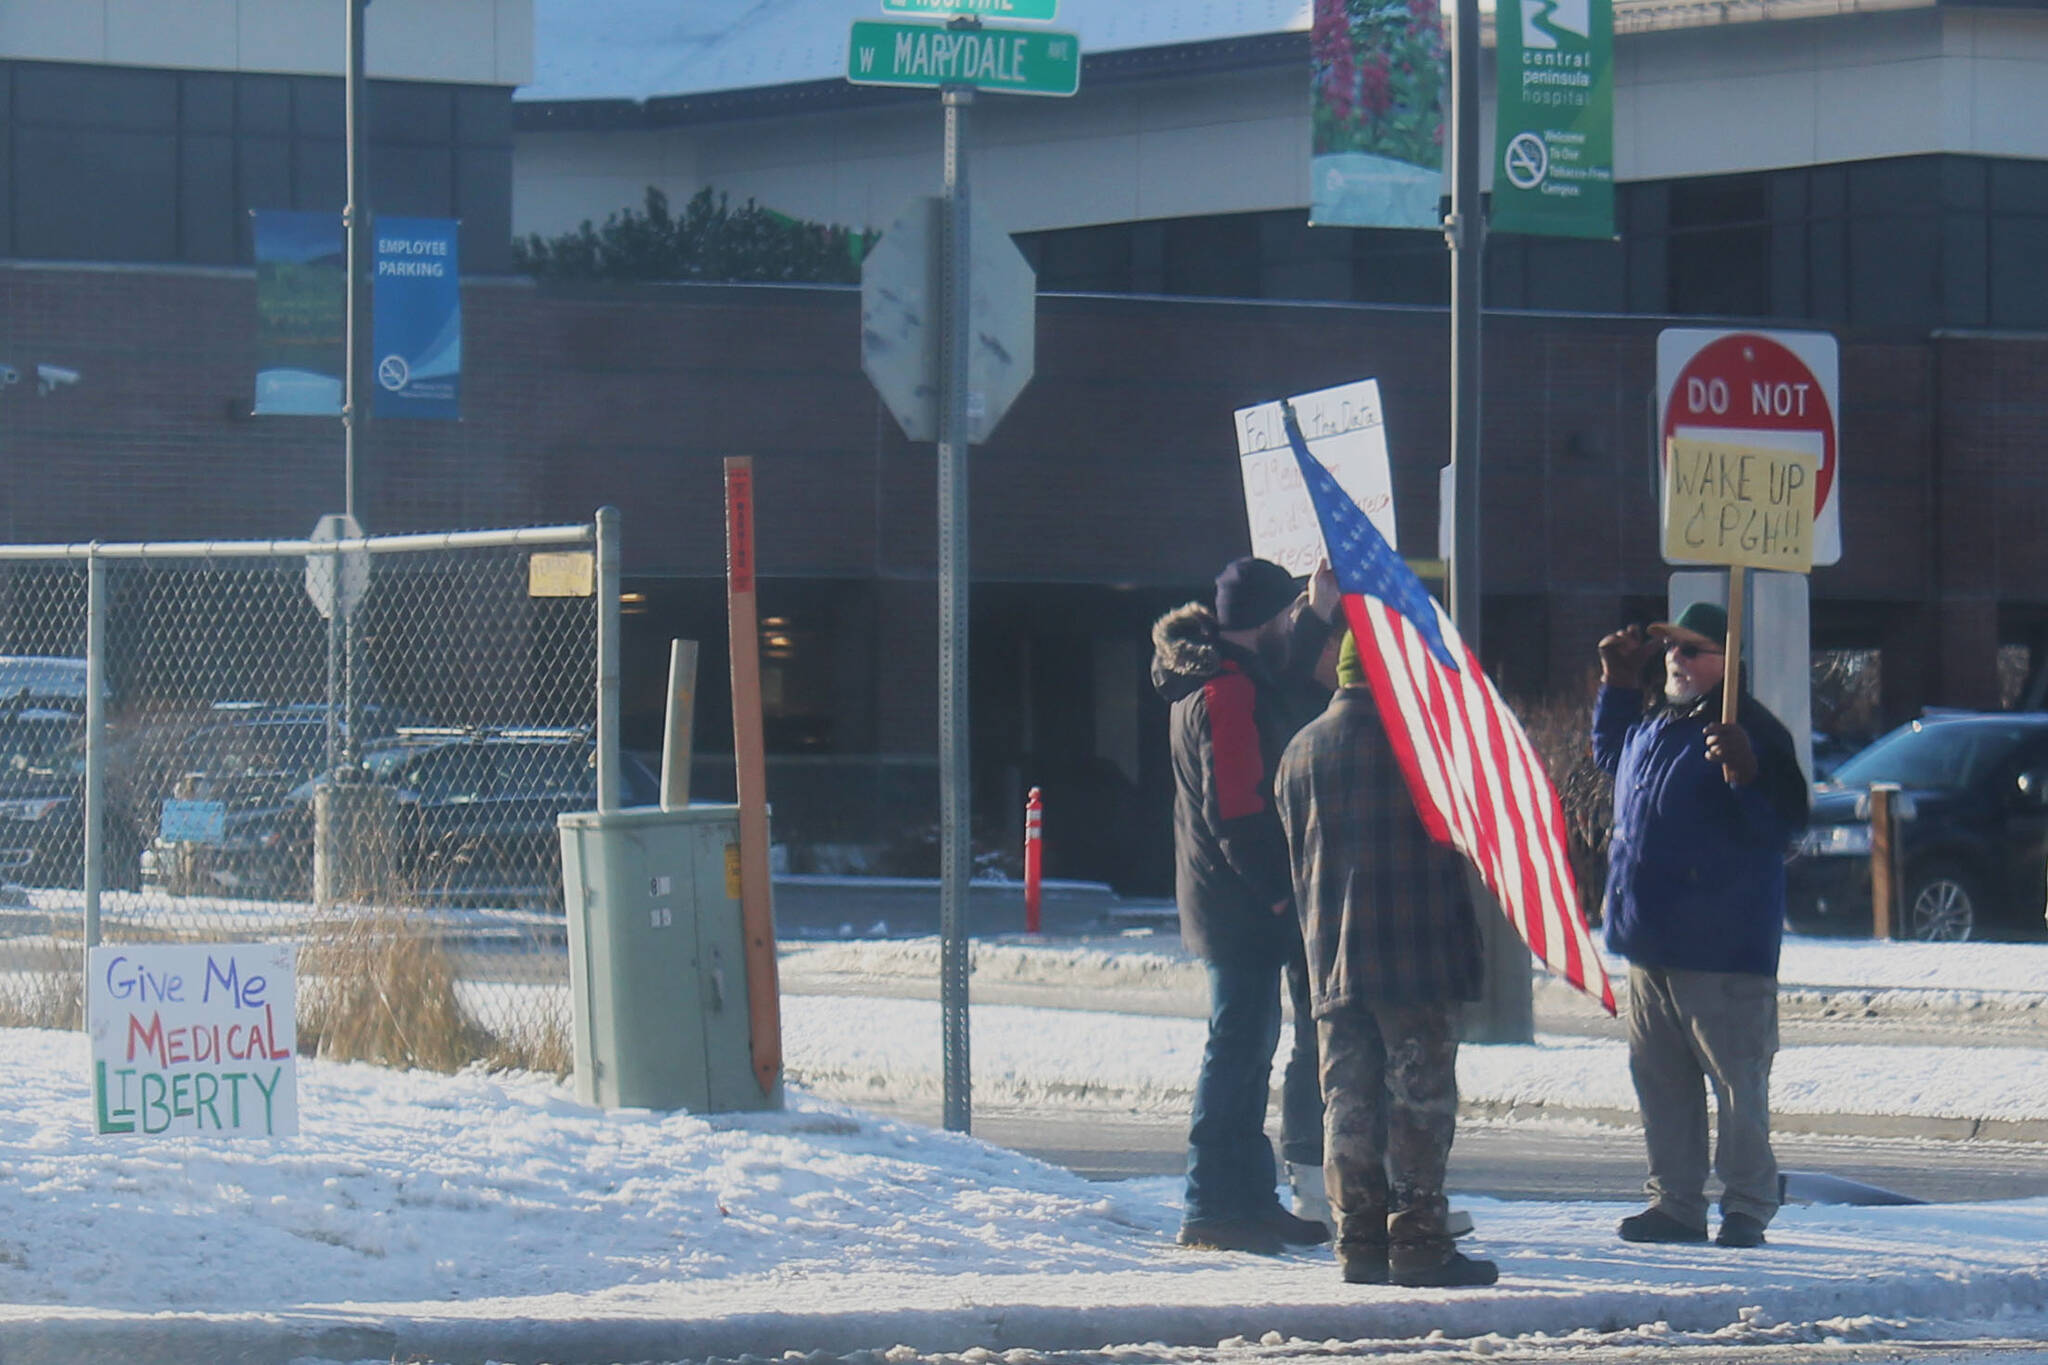 Protesters demonstrate outside of Central Peninsula Hospital on Friday, Nov. 5, 2021 in Soldotna, Alaska. The group was advocating for the use of ivermectin as a treatment option for a COVID-19 patient hospitalized at CPH. (Ashlyn O’Hara/Peninsula Clarion)